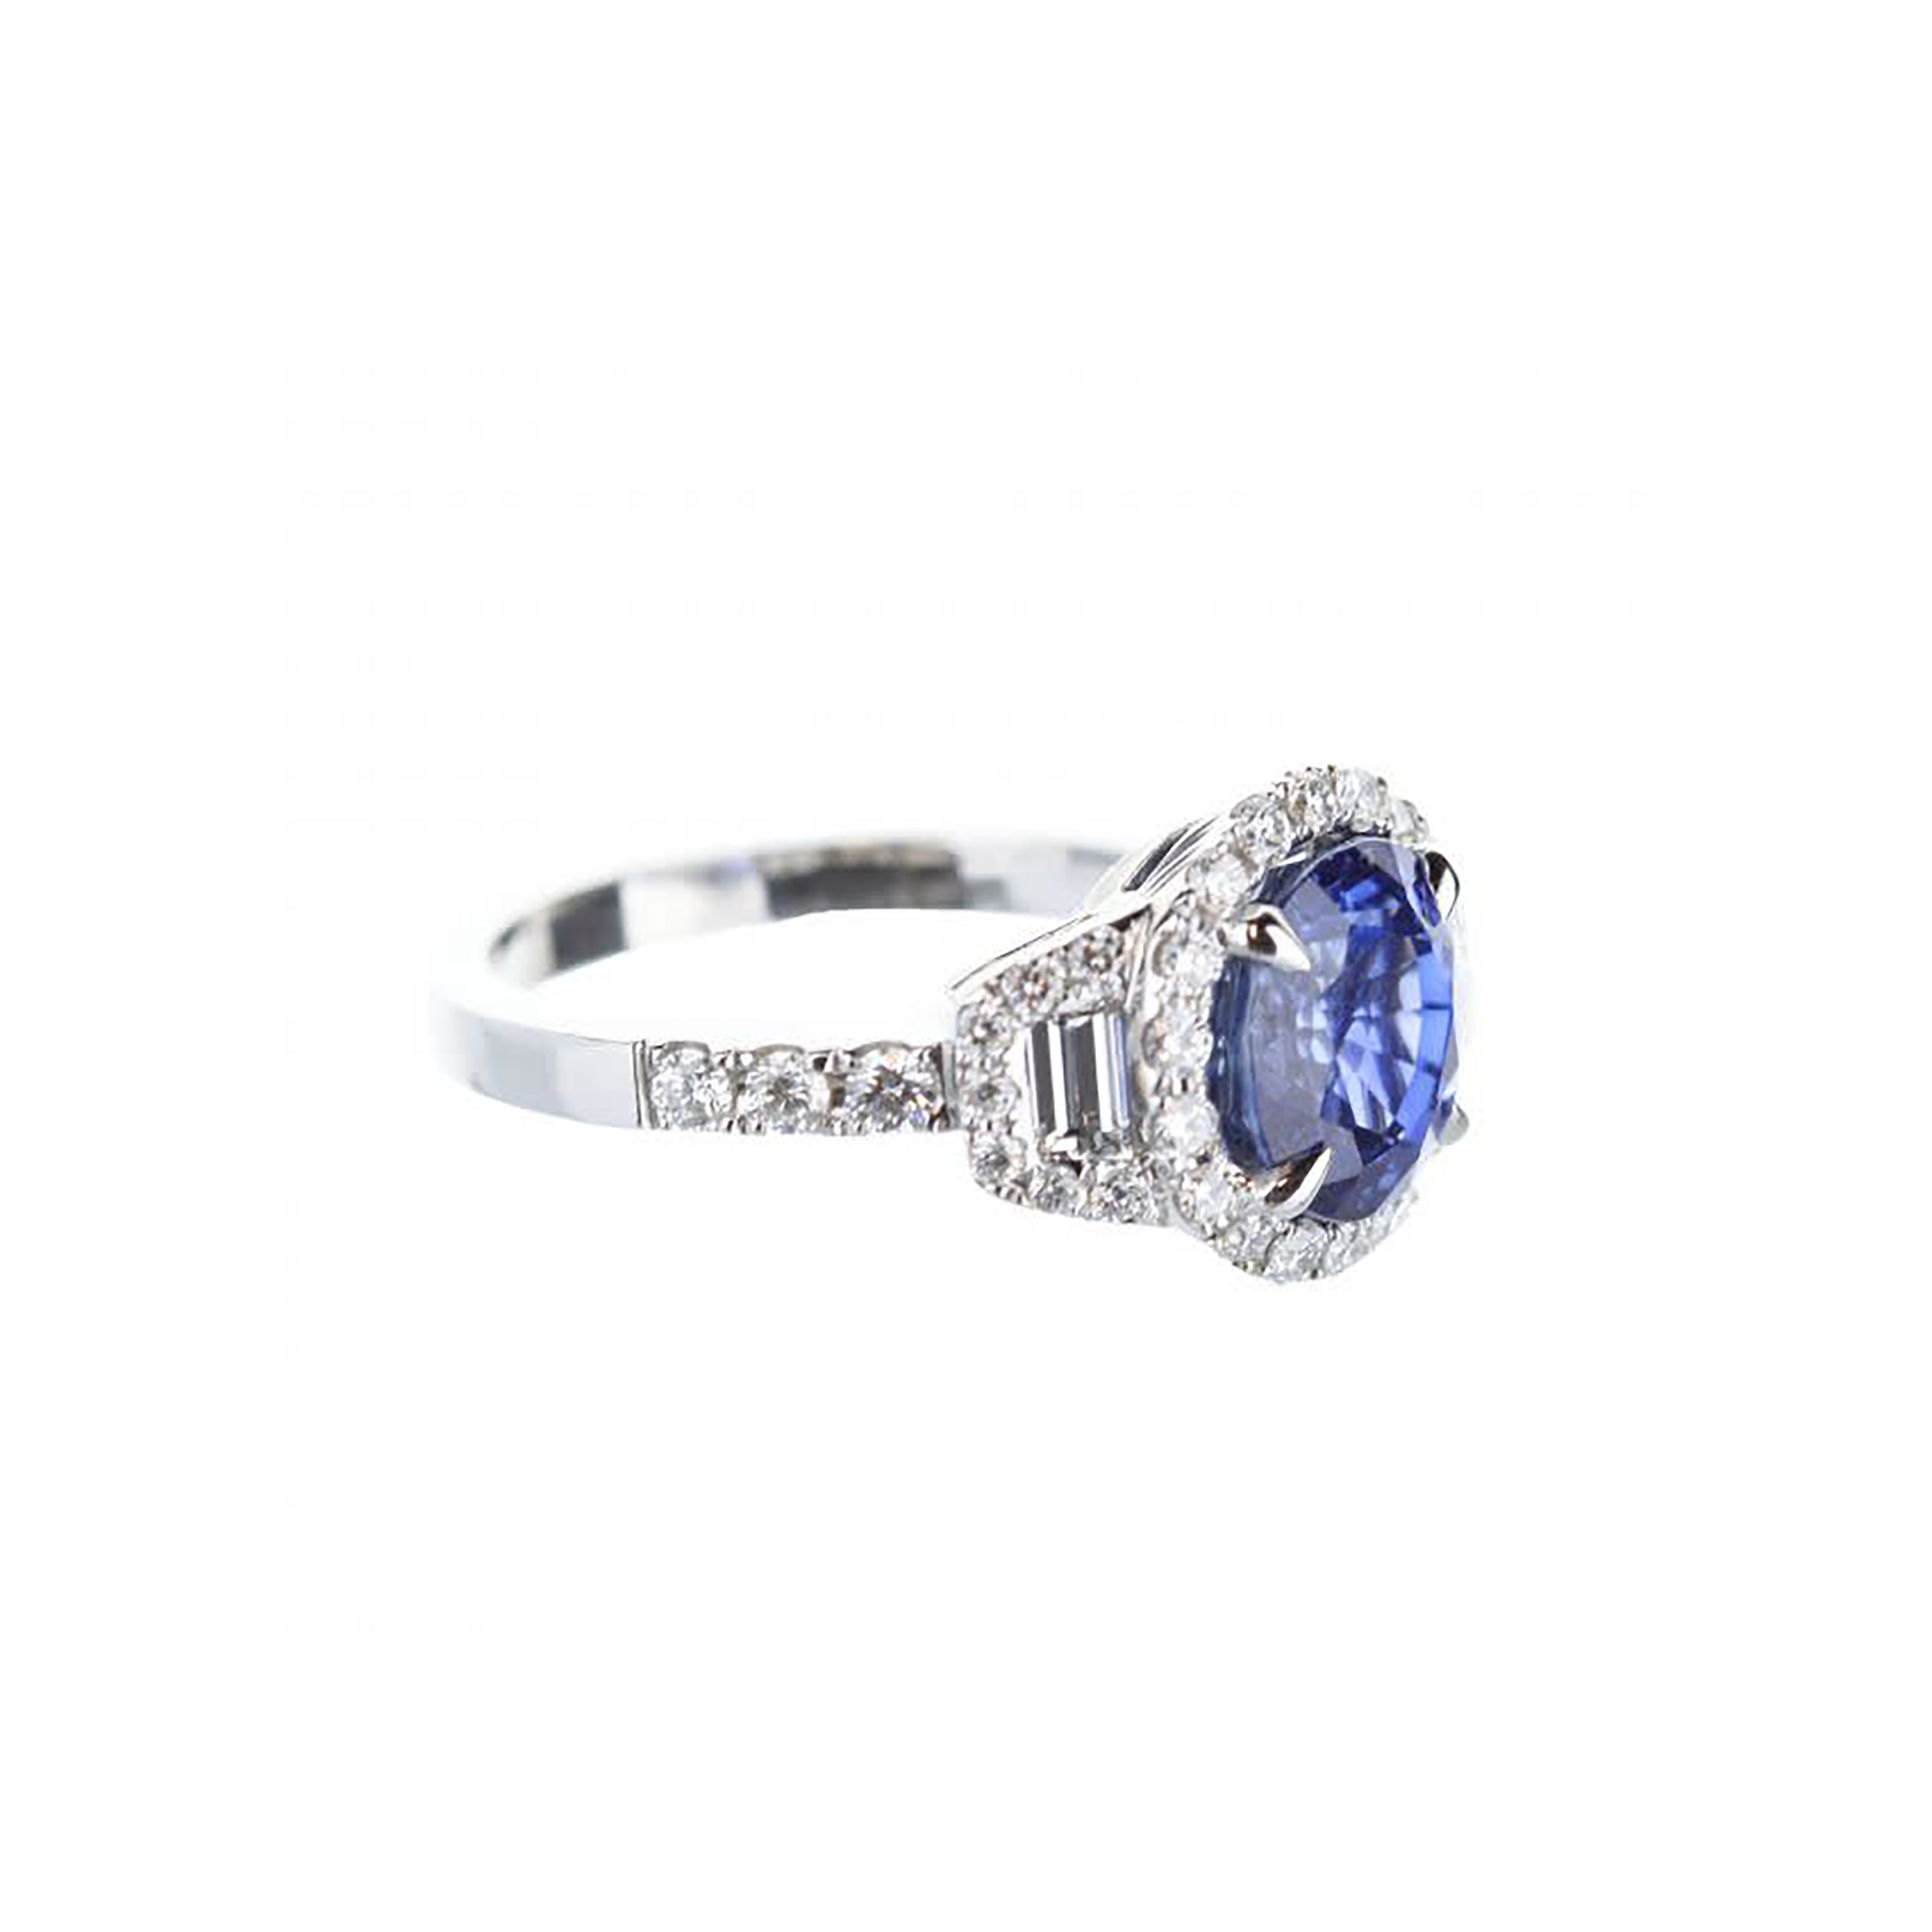 18K White Gold Round Blue Sapphire Engagement Ring With Trapezoid-Cut Diamond Accents And Diamond Halo